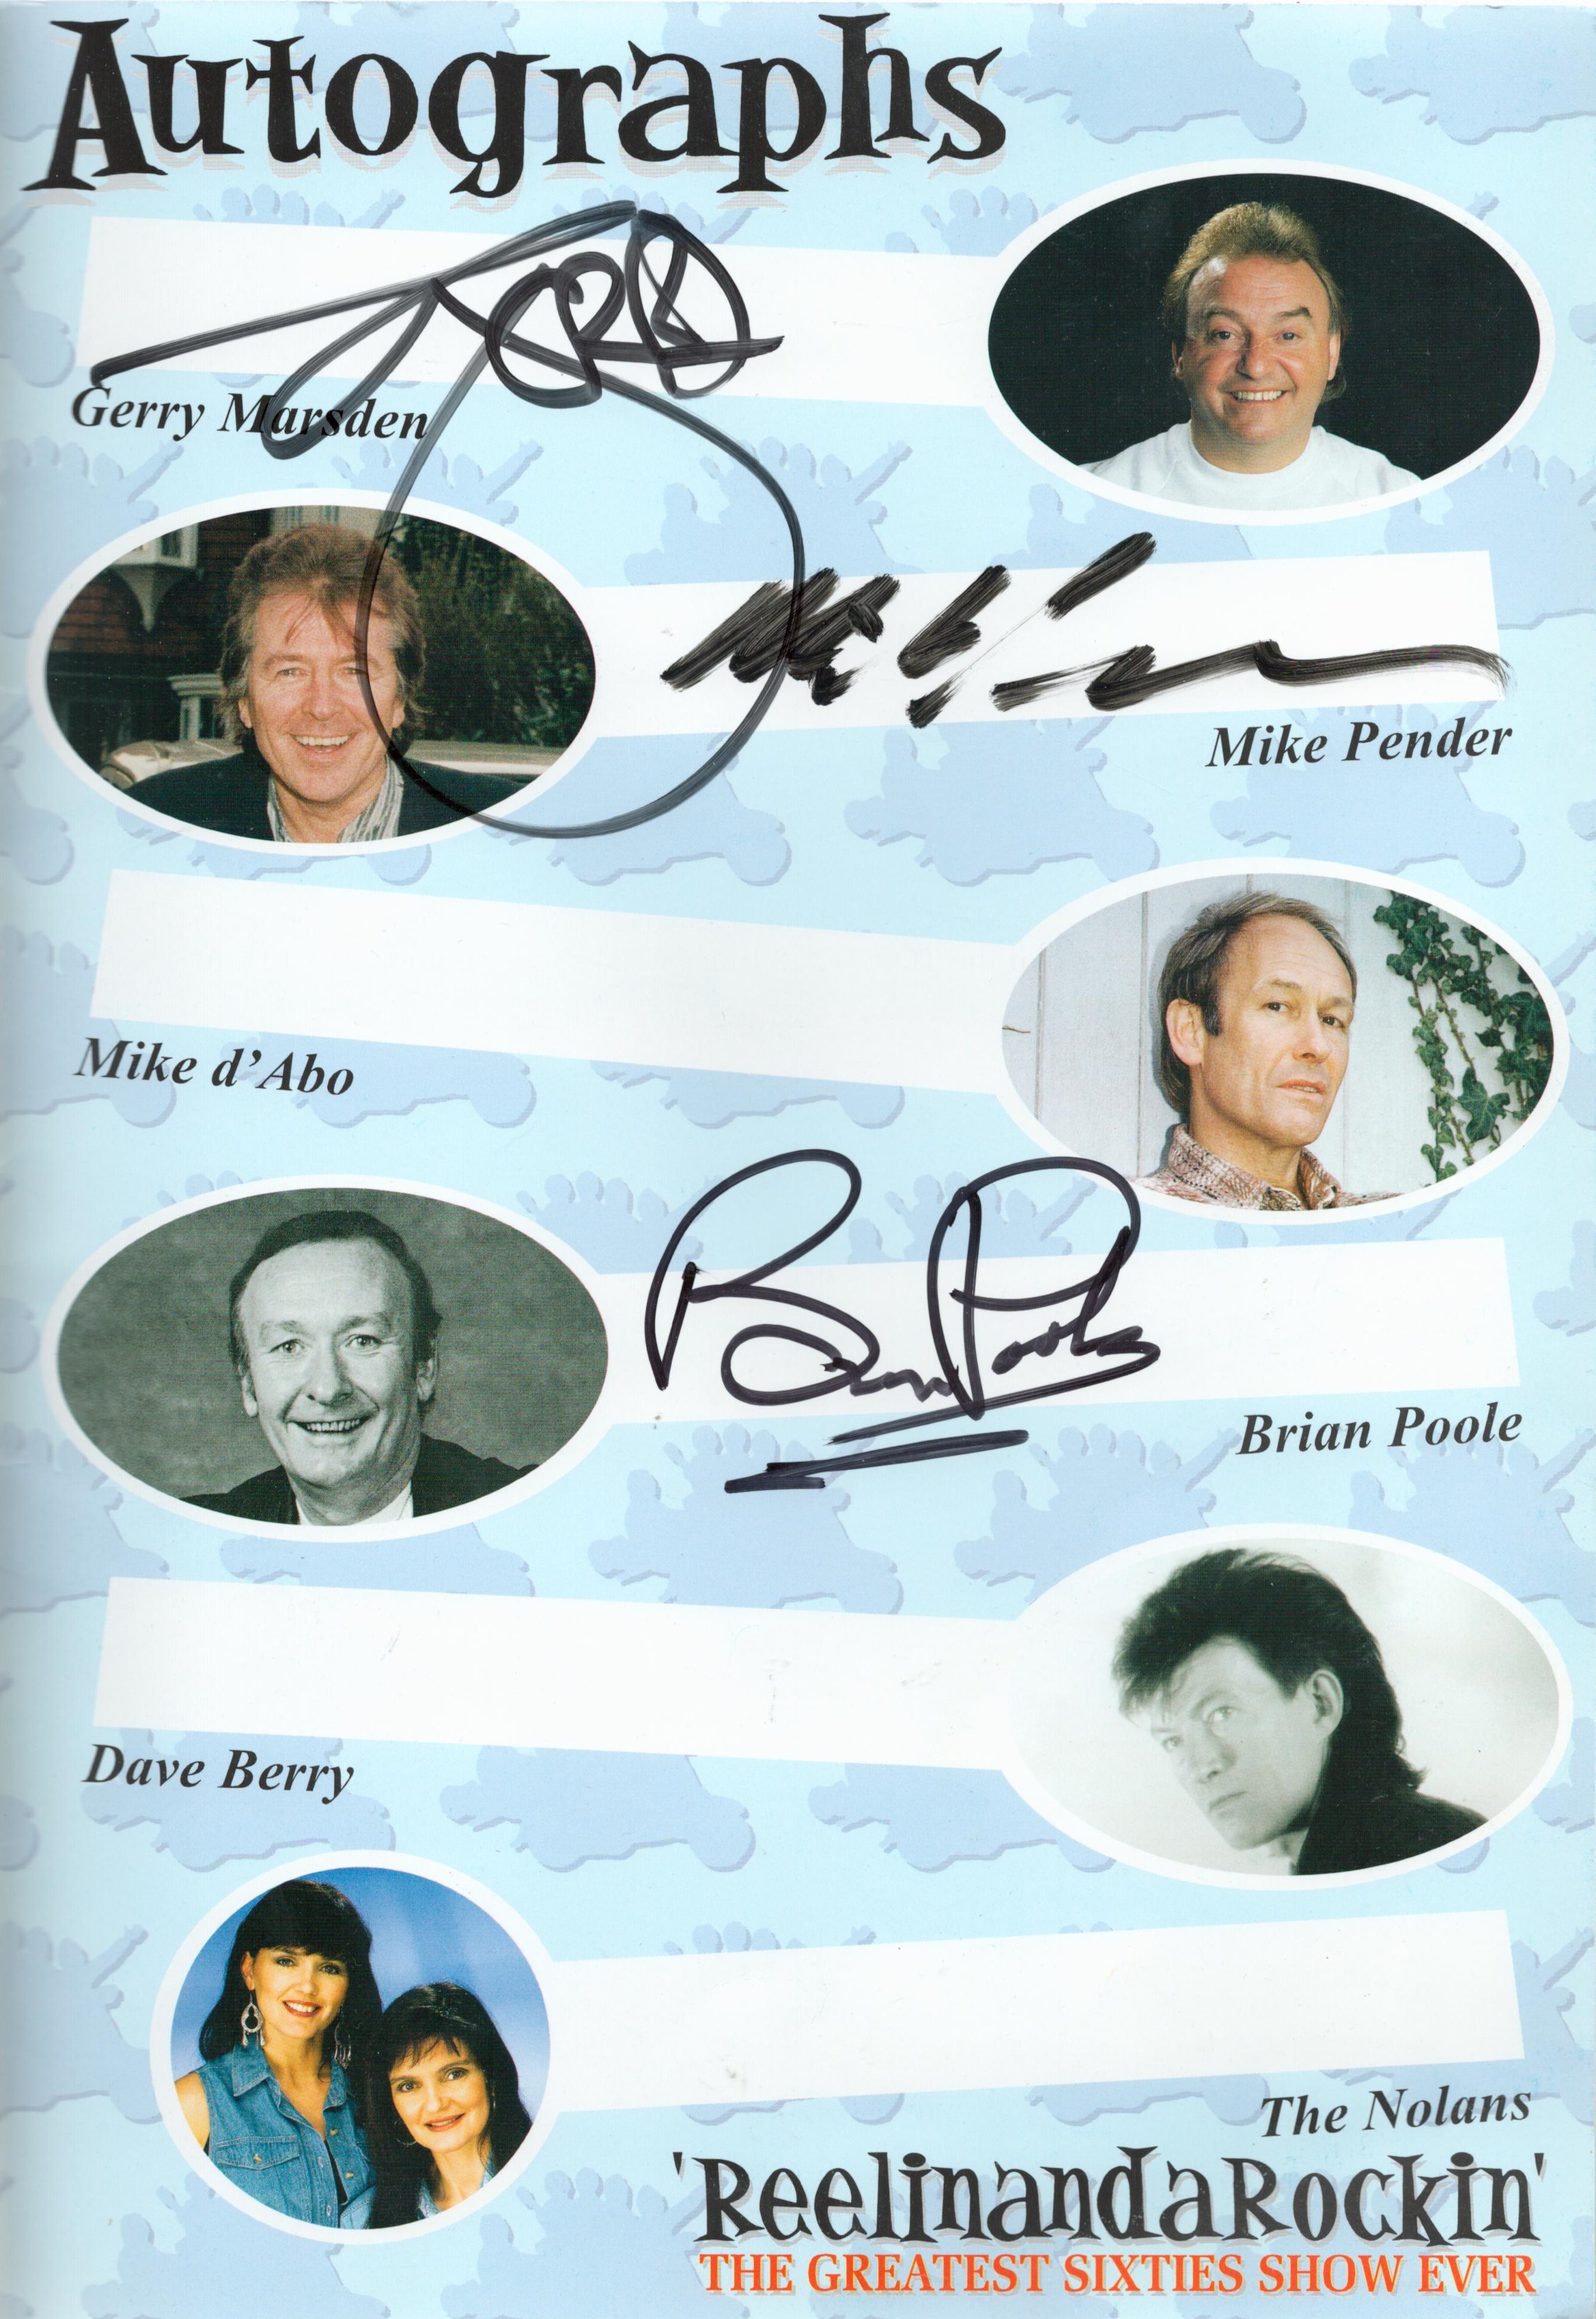 Gerry Marsden, Mike Pender and Brian Poole Signed ReelinandaRocking- The Greatest Sixties Show - Image 2 of 2